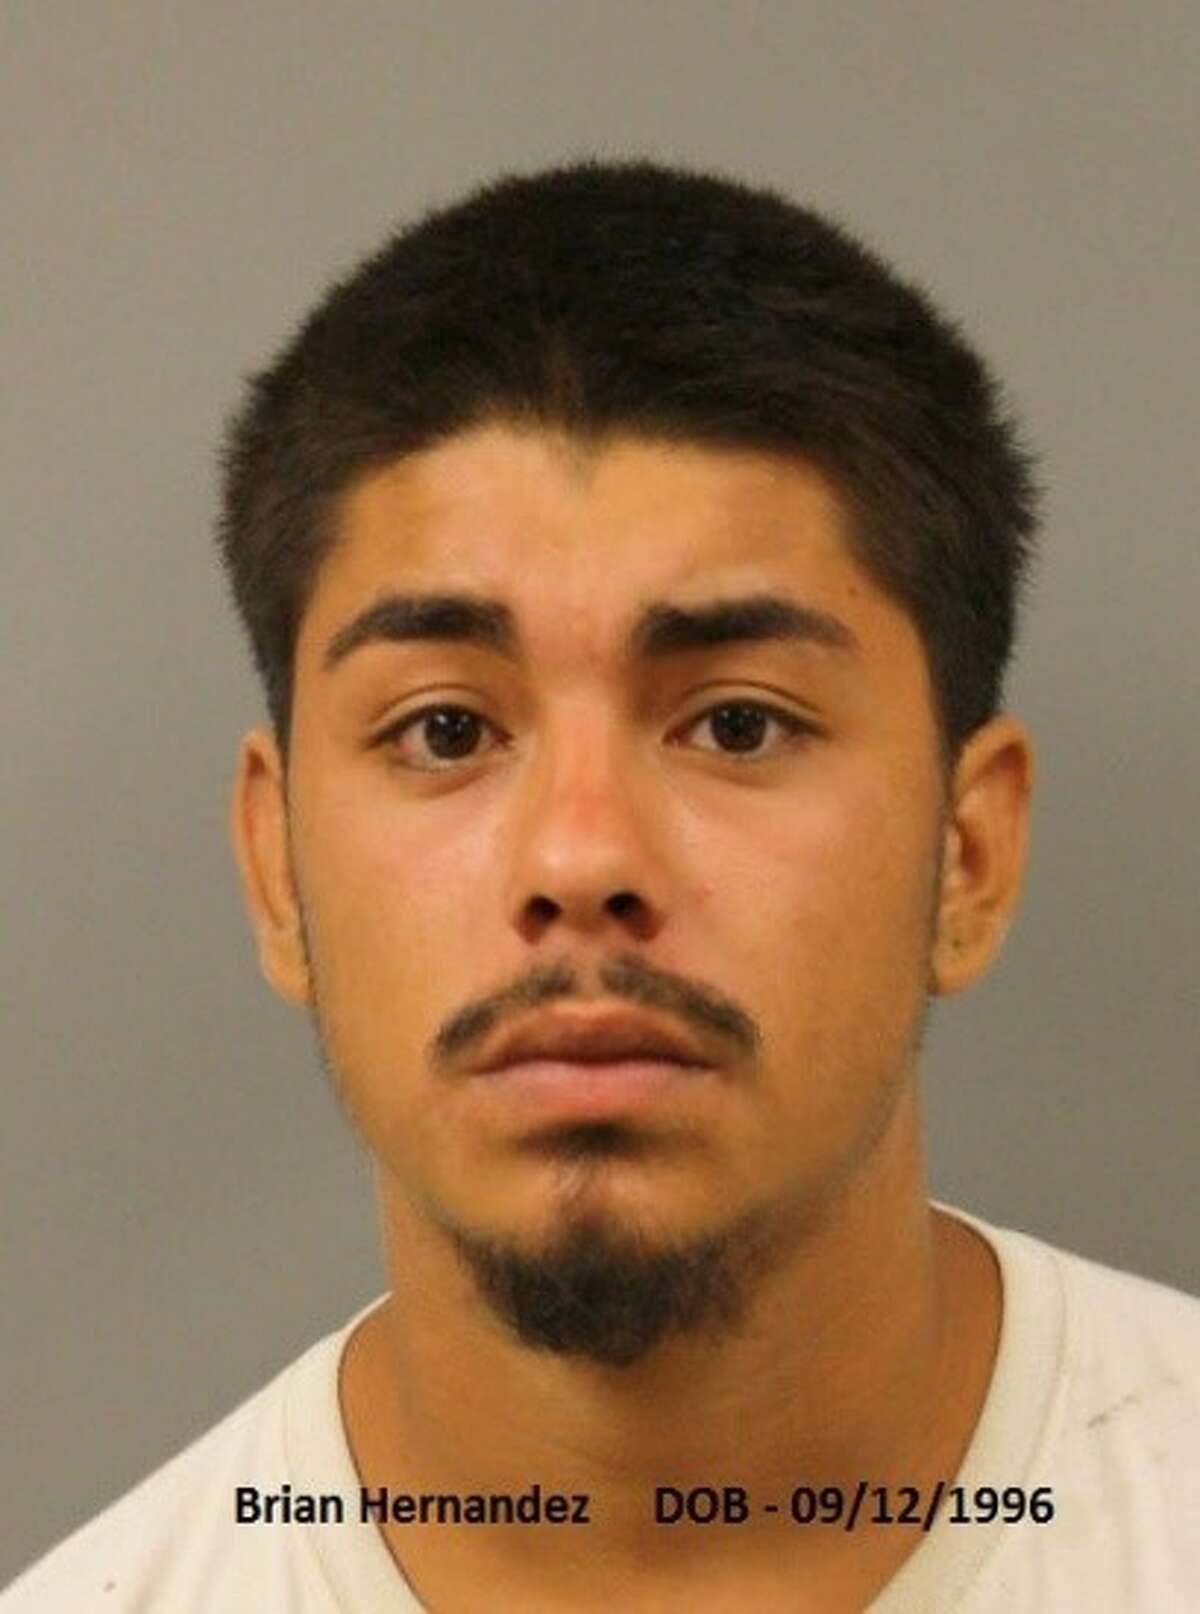 Brian Hernandez has been charged with failure to stop and give information, engaging in organized crime and burglary of a motor vehicle as part of an alleged robbery and burglary ring that targeted cars, homes and individuals in Harris County.